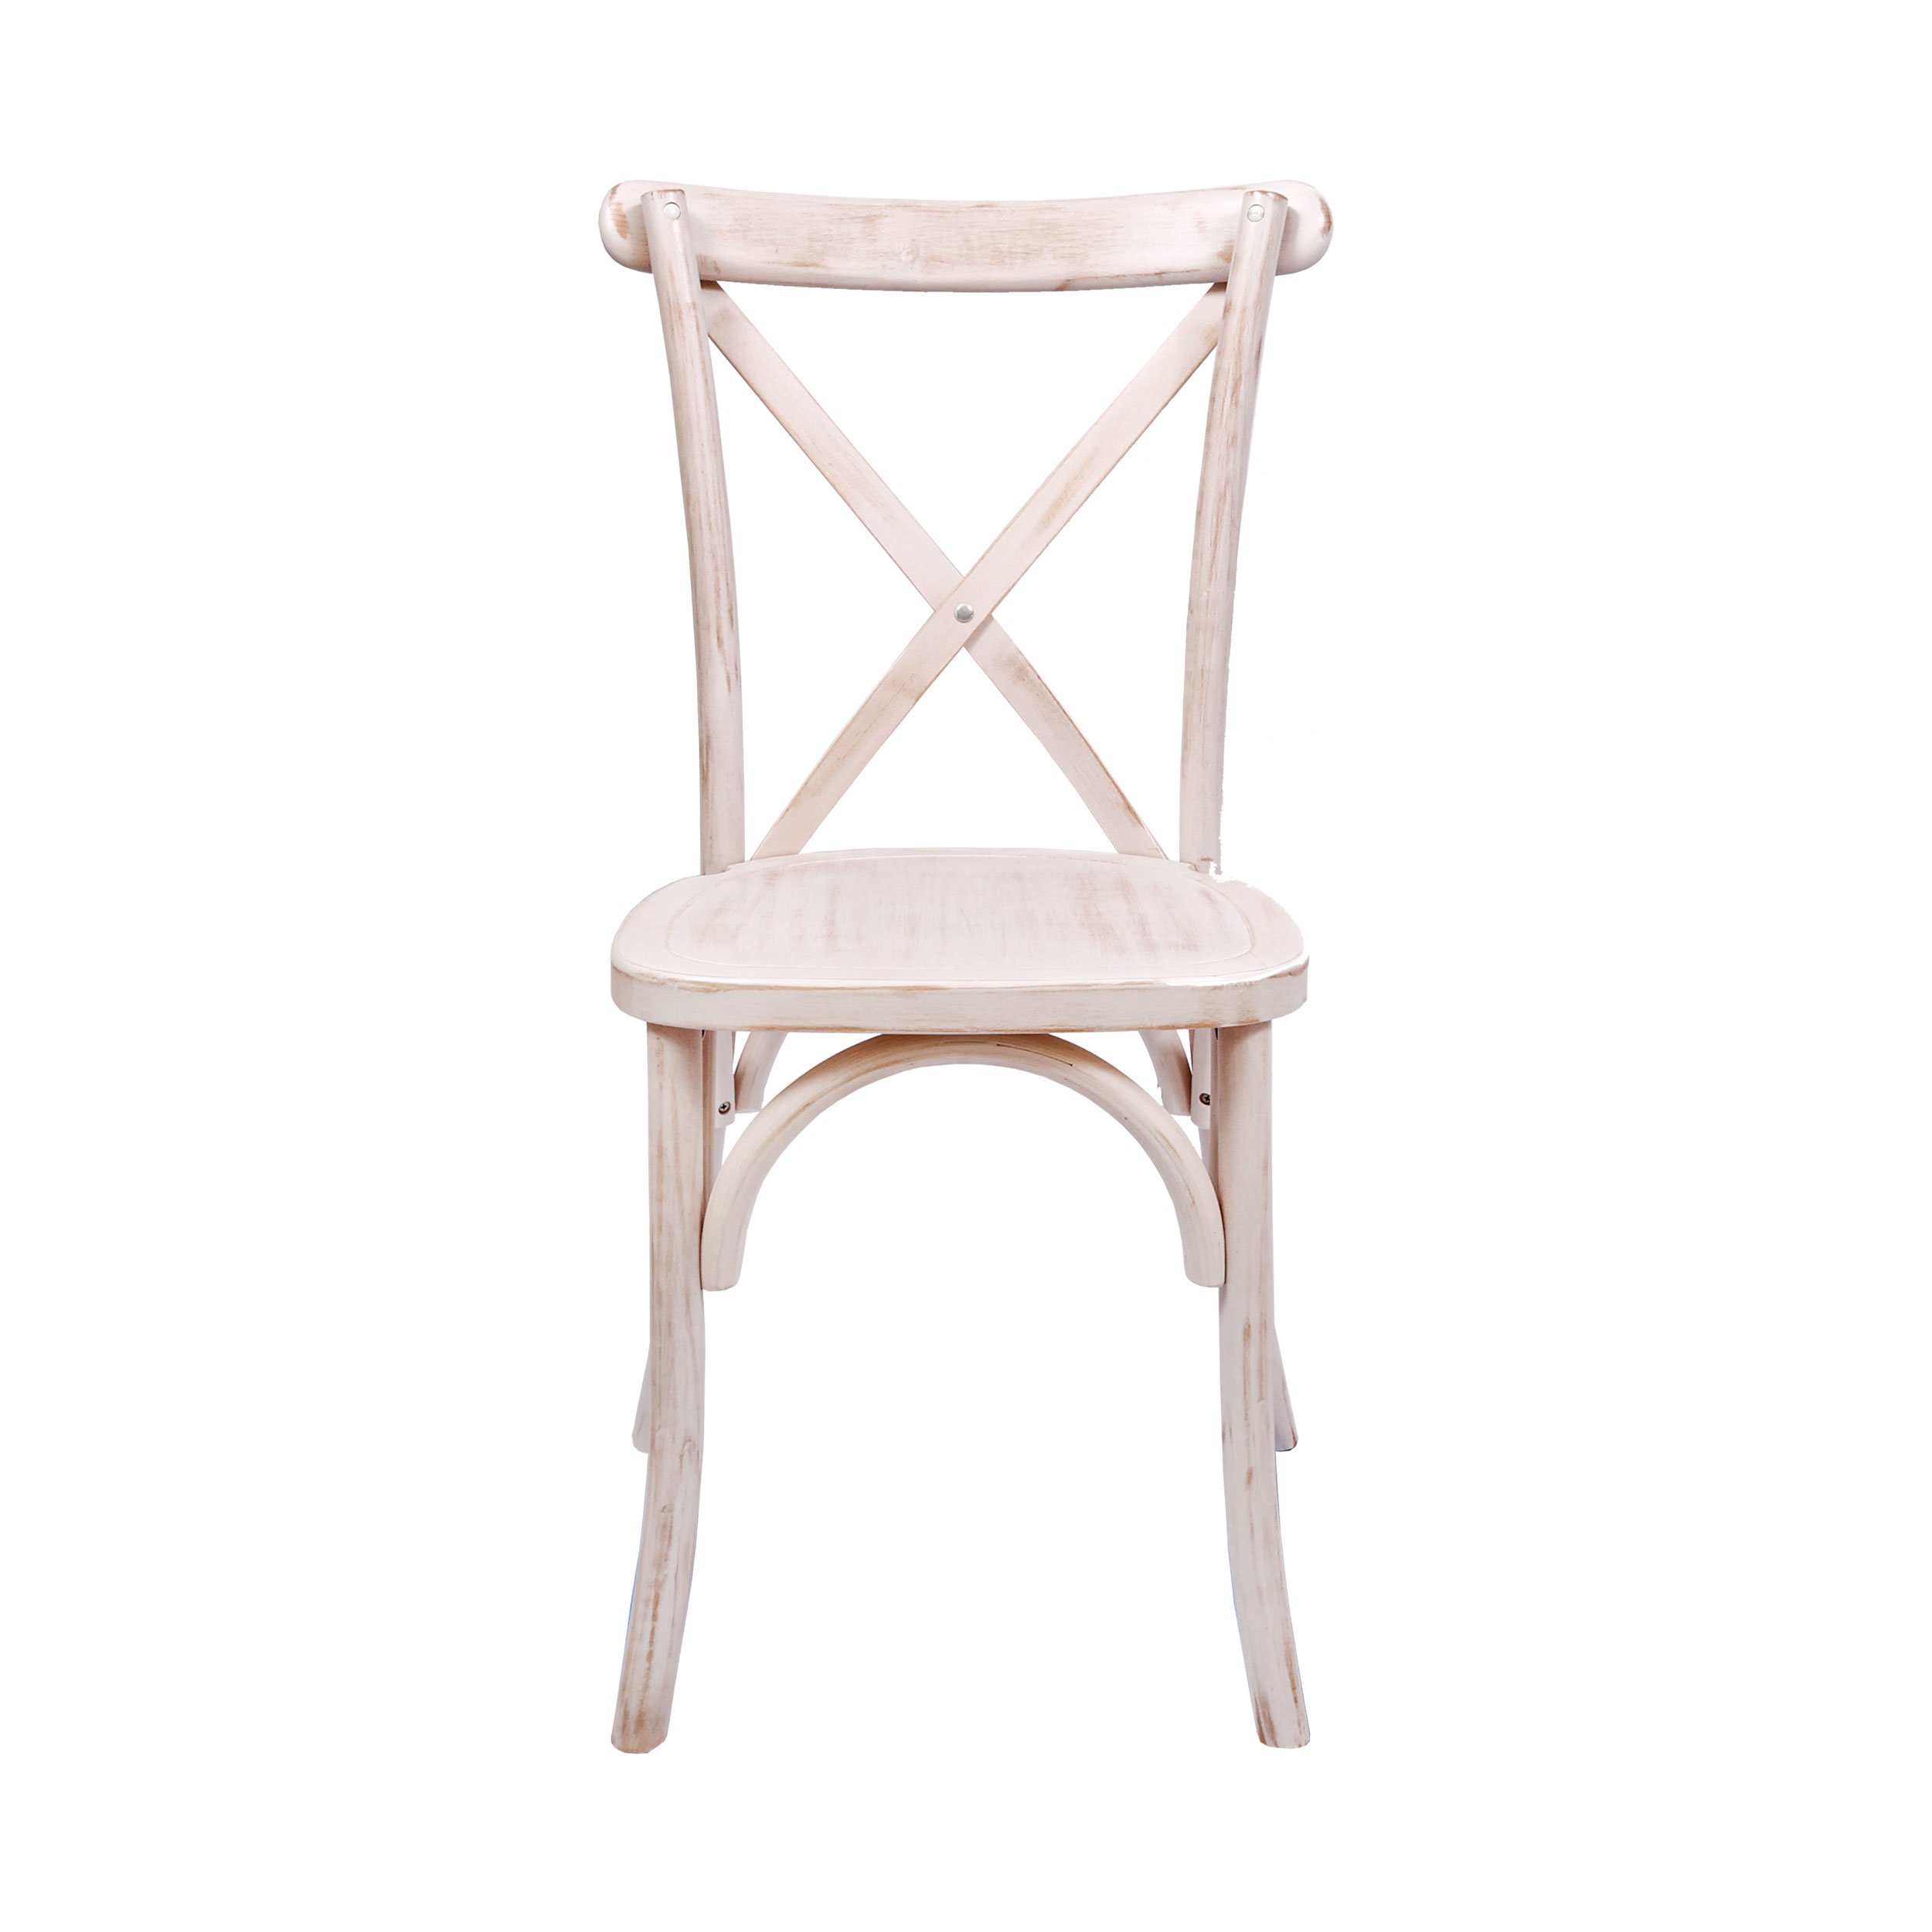 Chair Wood Crossback White Distressed CXWWD ZG T Front View